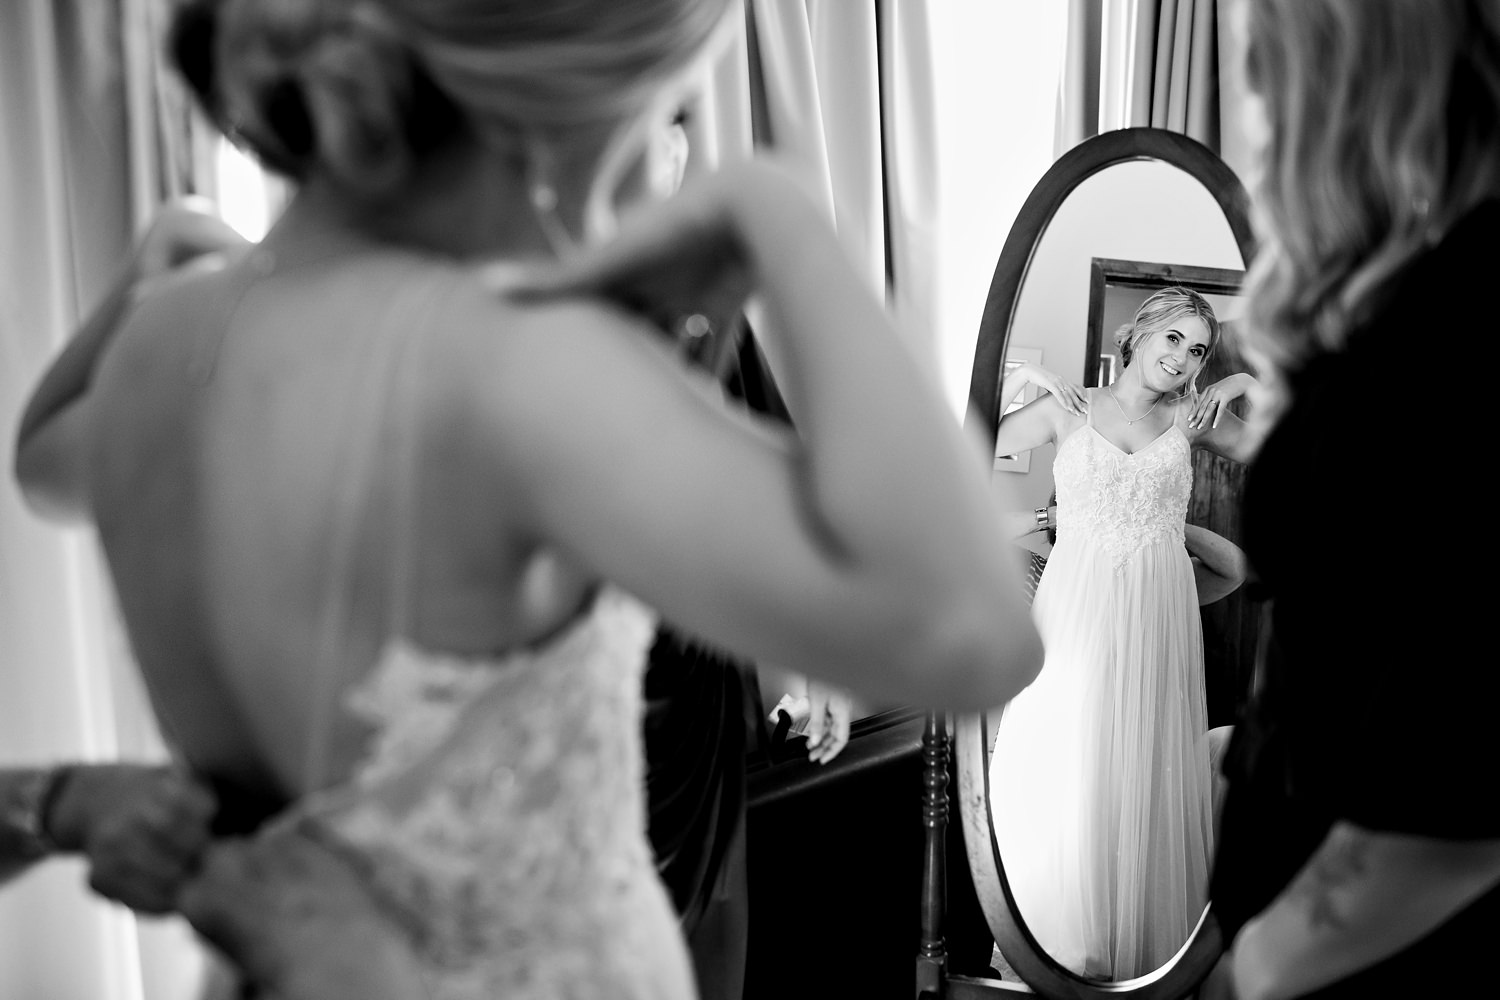 Wedding photographer in South Africa captures the bride smiling as she looks at herself in the oval mirror whilst she is being dressed